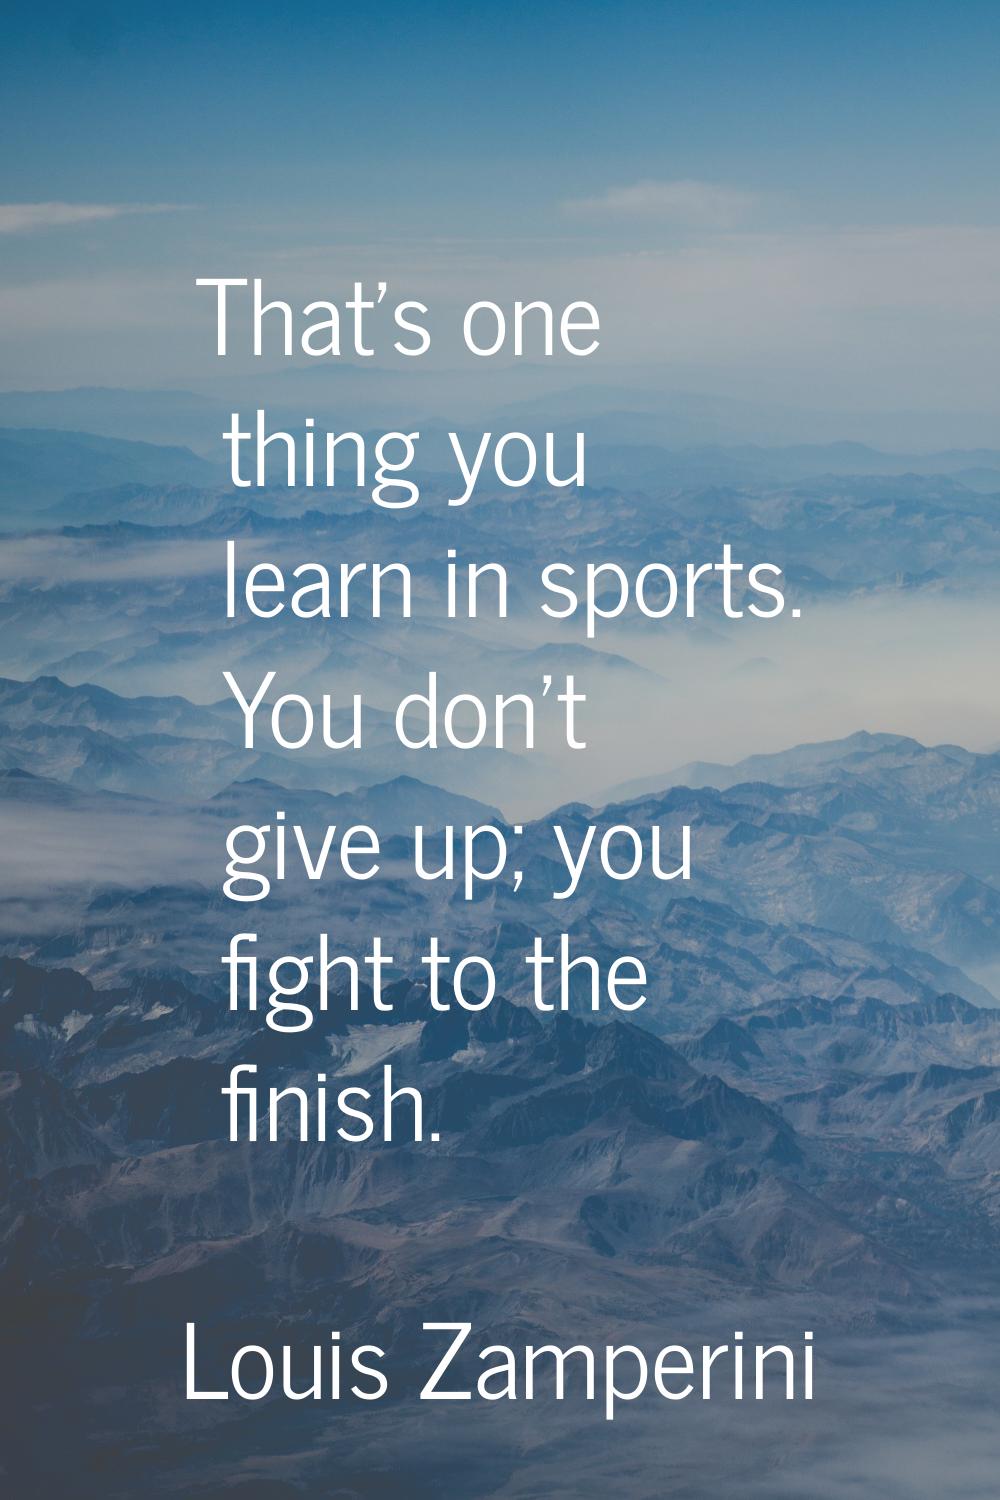 That's one thing you learn in sports. You don't give up; you fight to the finish.